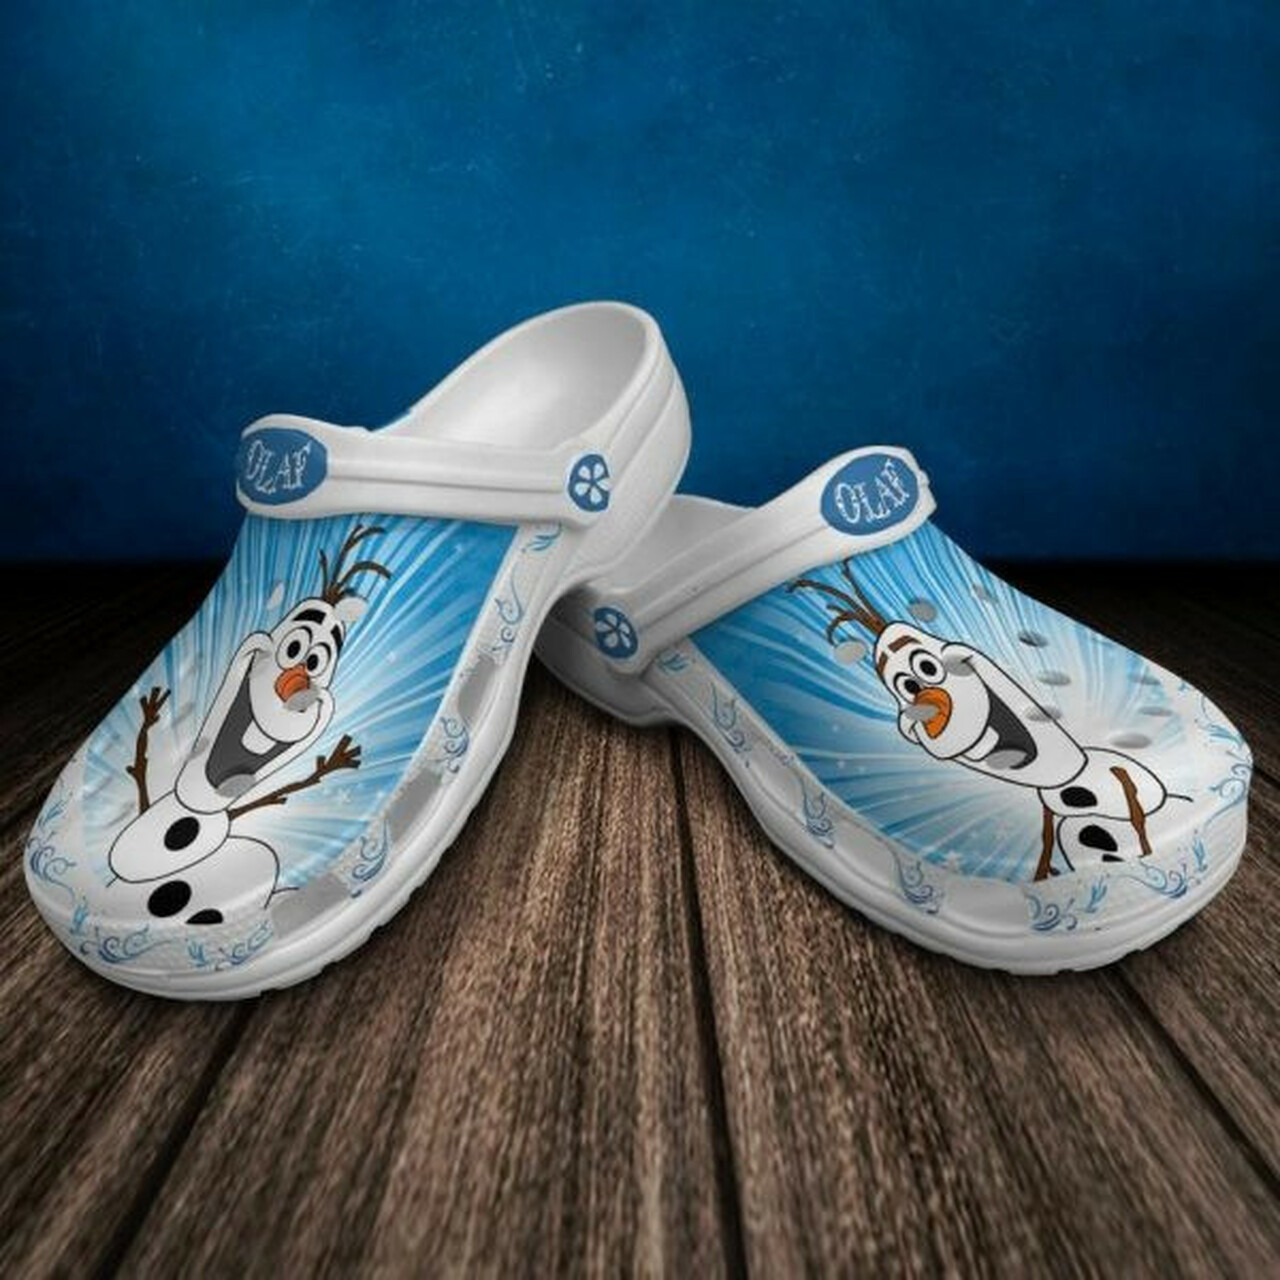 Olaf Funny Crocss Crocband Clog Comfortable Water Shoes In Blue